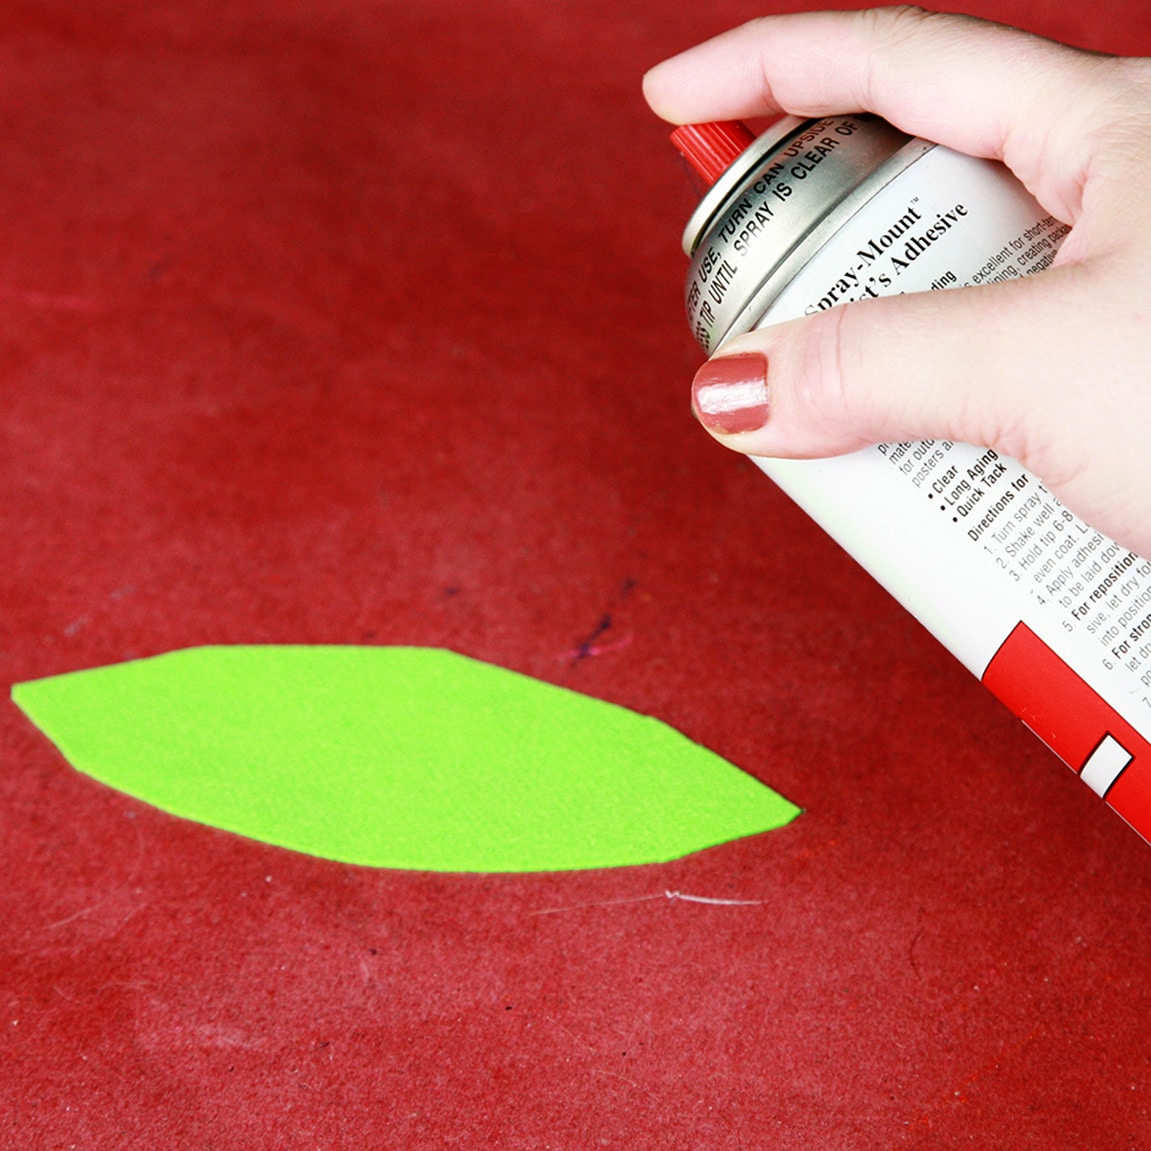 A hand us aiming a spray bottle at a piece of bright green spandex.